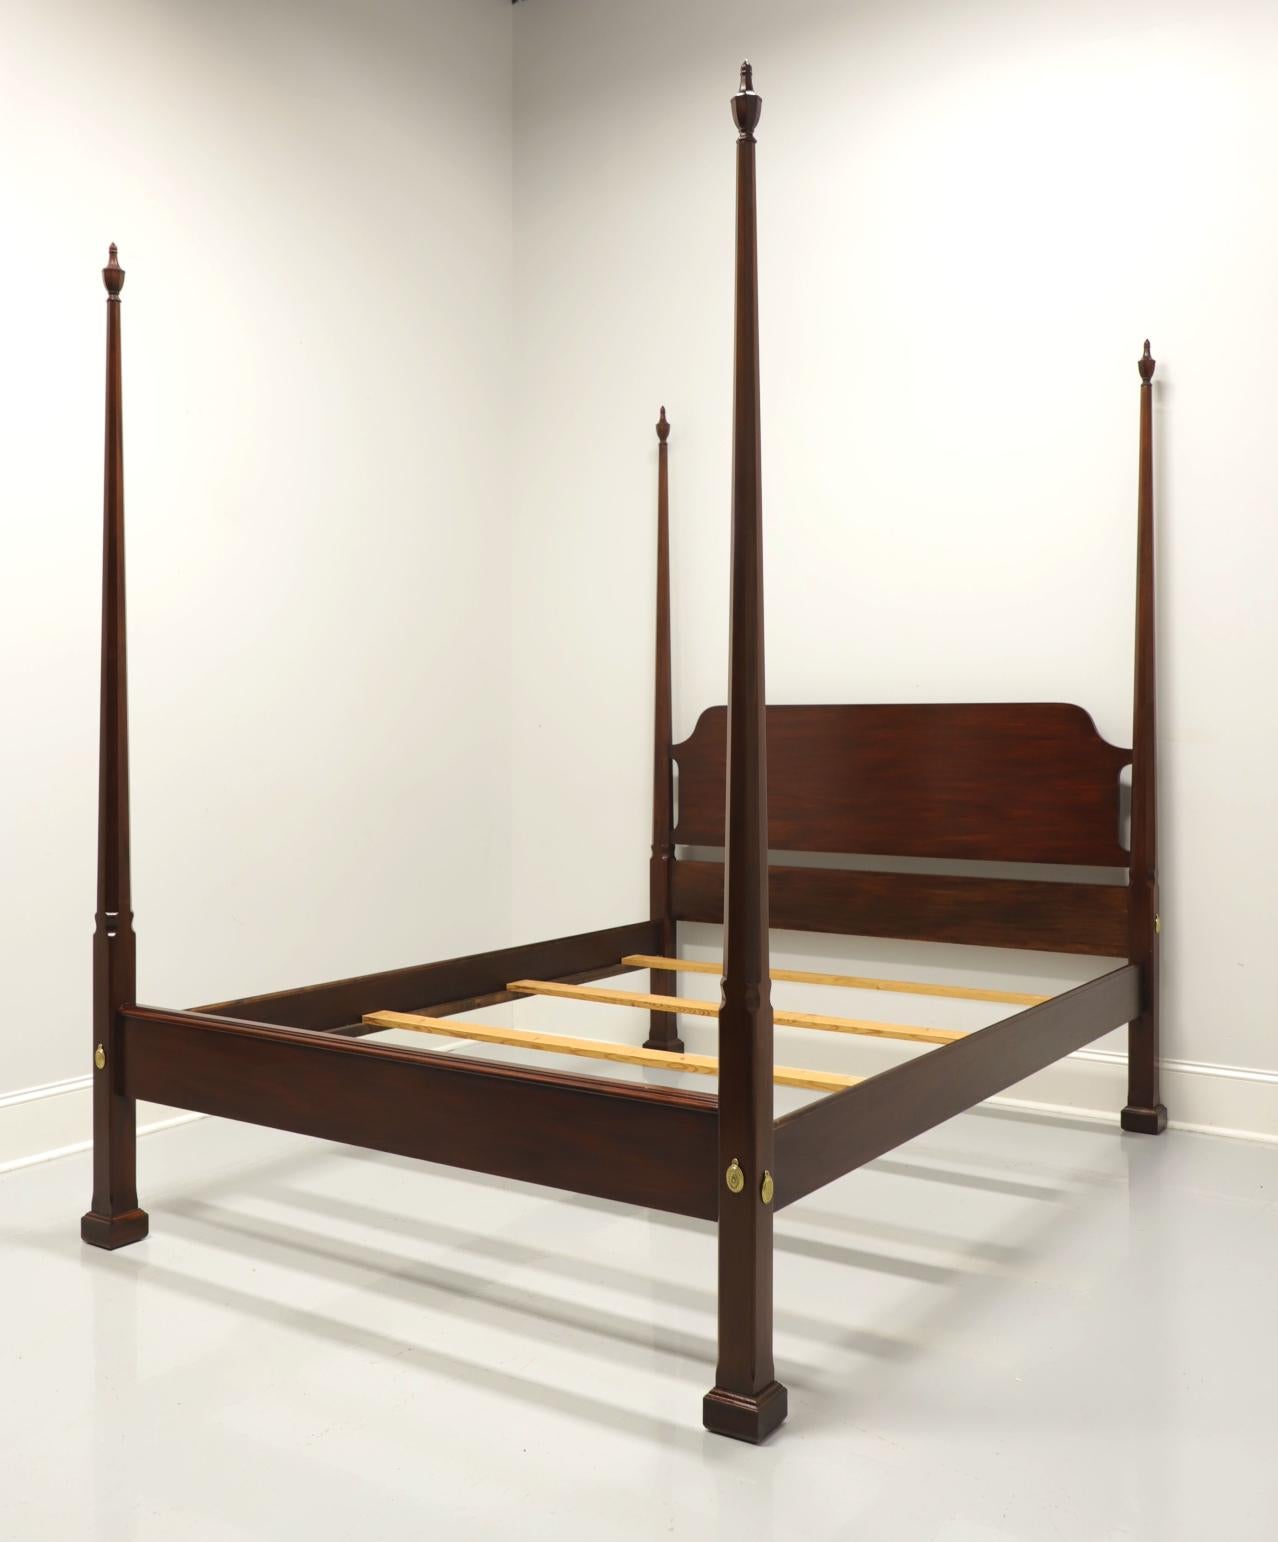 A Traditional style queen size pencil post bed by Henkel Harris, of Winchester, Virginia, USA. Solid mahogany with four pencil shaped posts with finials. Brass covers to headboard and footboard. Wood slat mattress supports. Made circa 1985.

Style